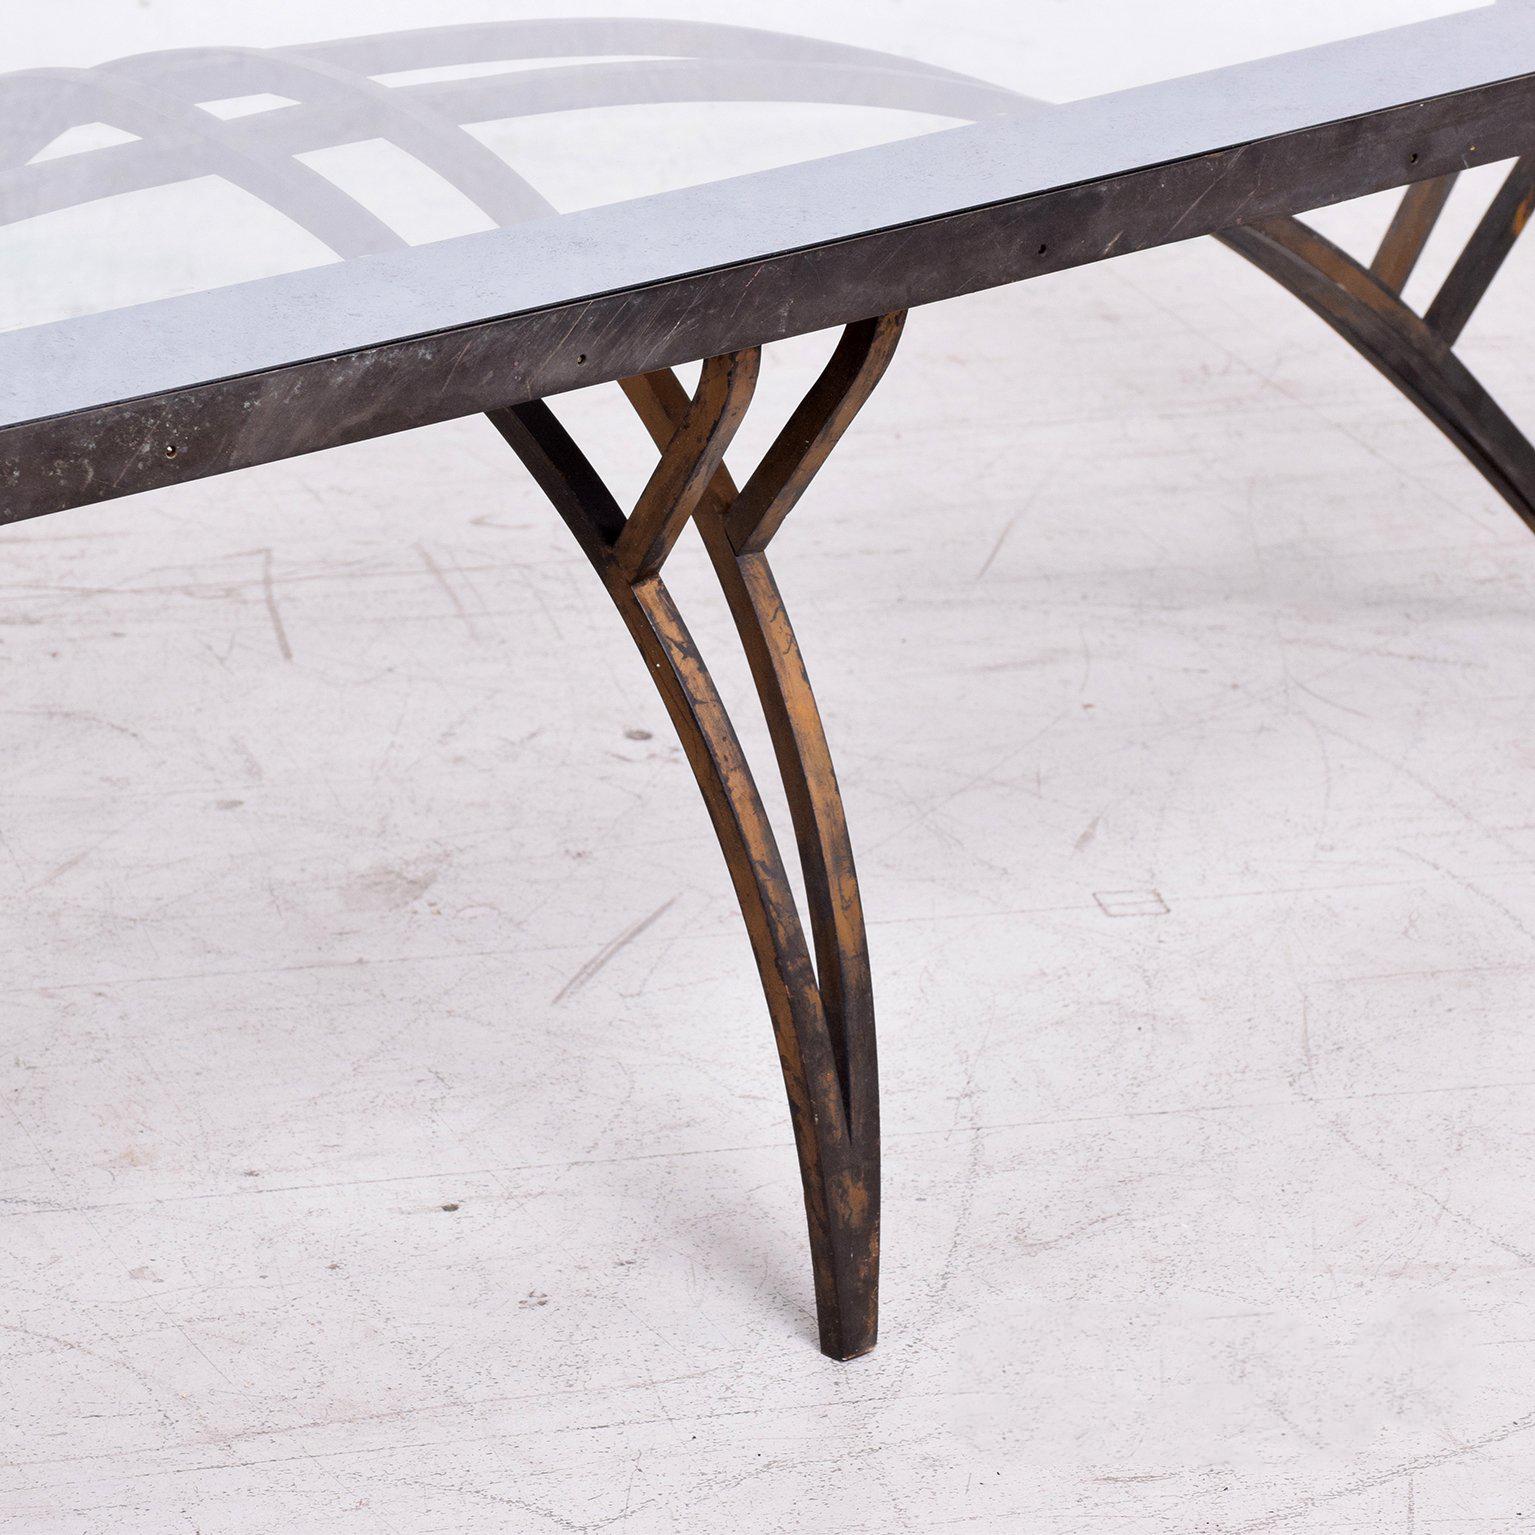 Mid-20th Century Mexican Modernist Rectangular Coffee Table Attributed to Arturo Pani